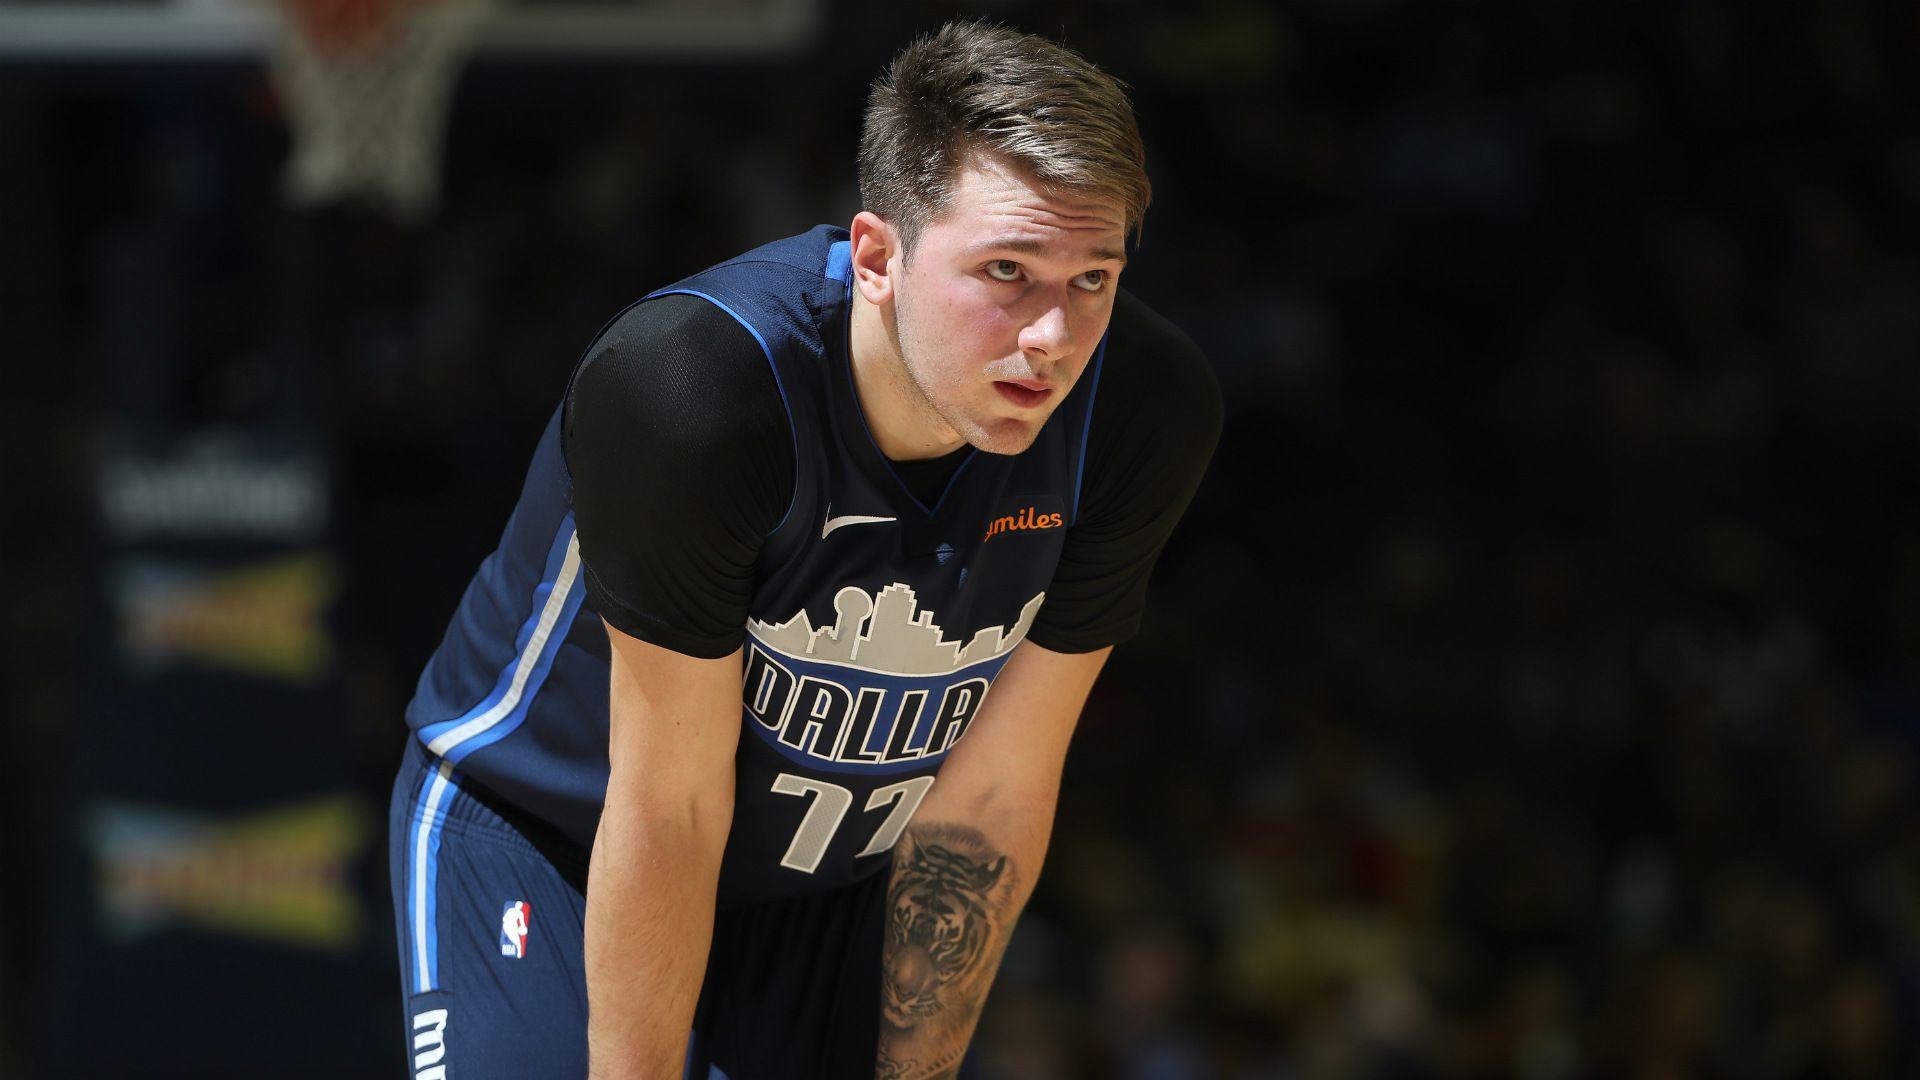 The star potential of Dallas Mavericks rookie Luka Doncic is already